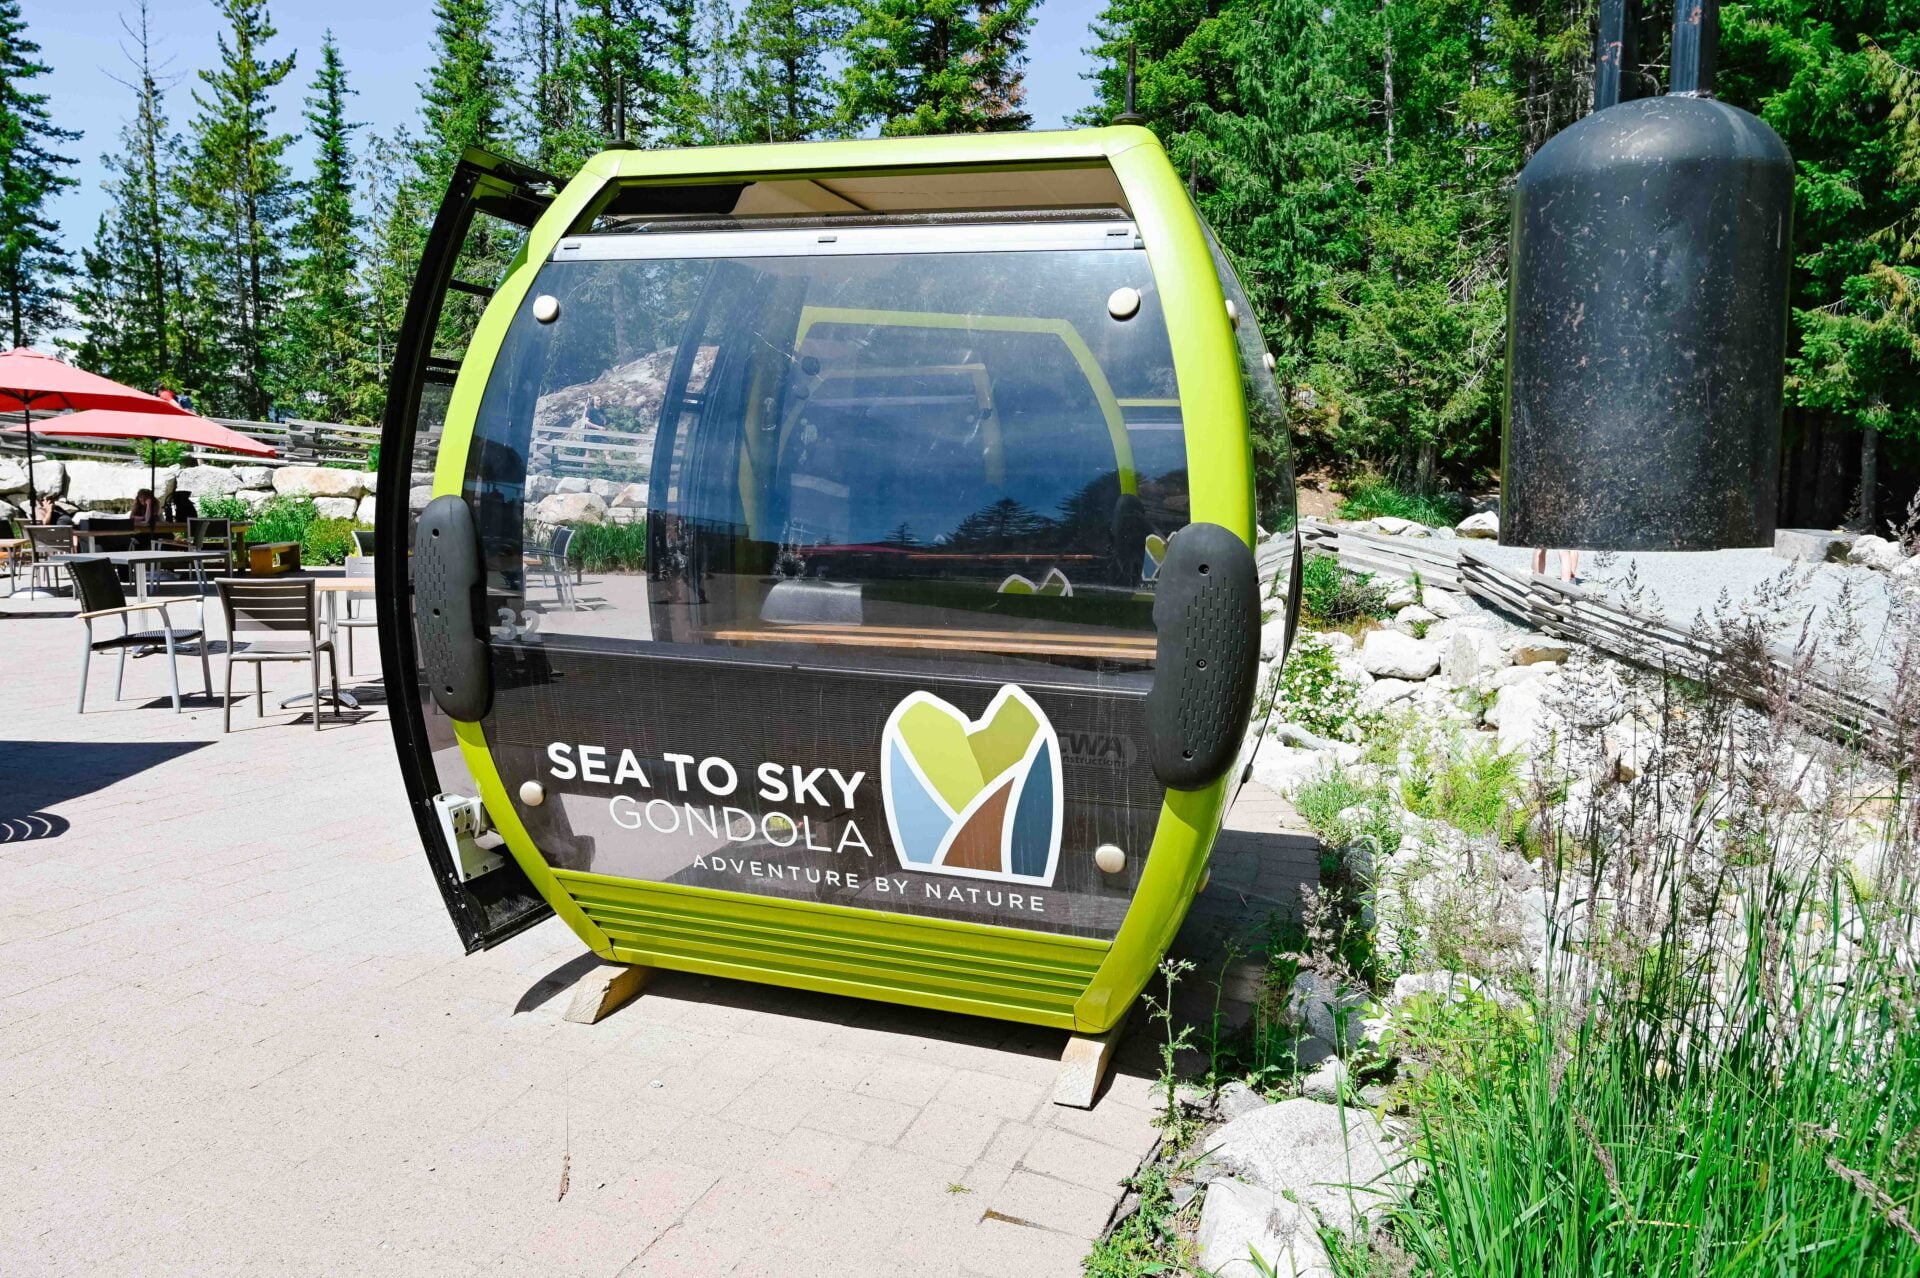 gondola cars that sit on the ground and are now cafe tables